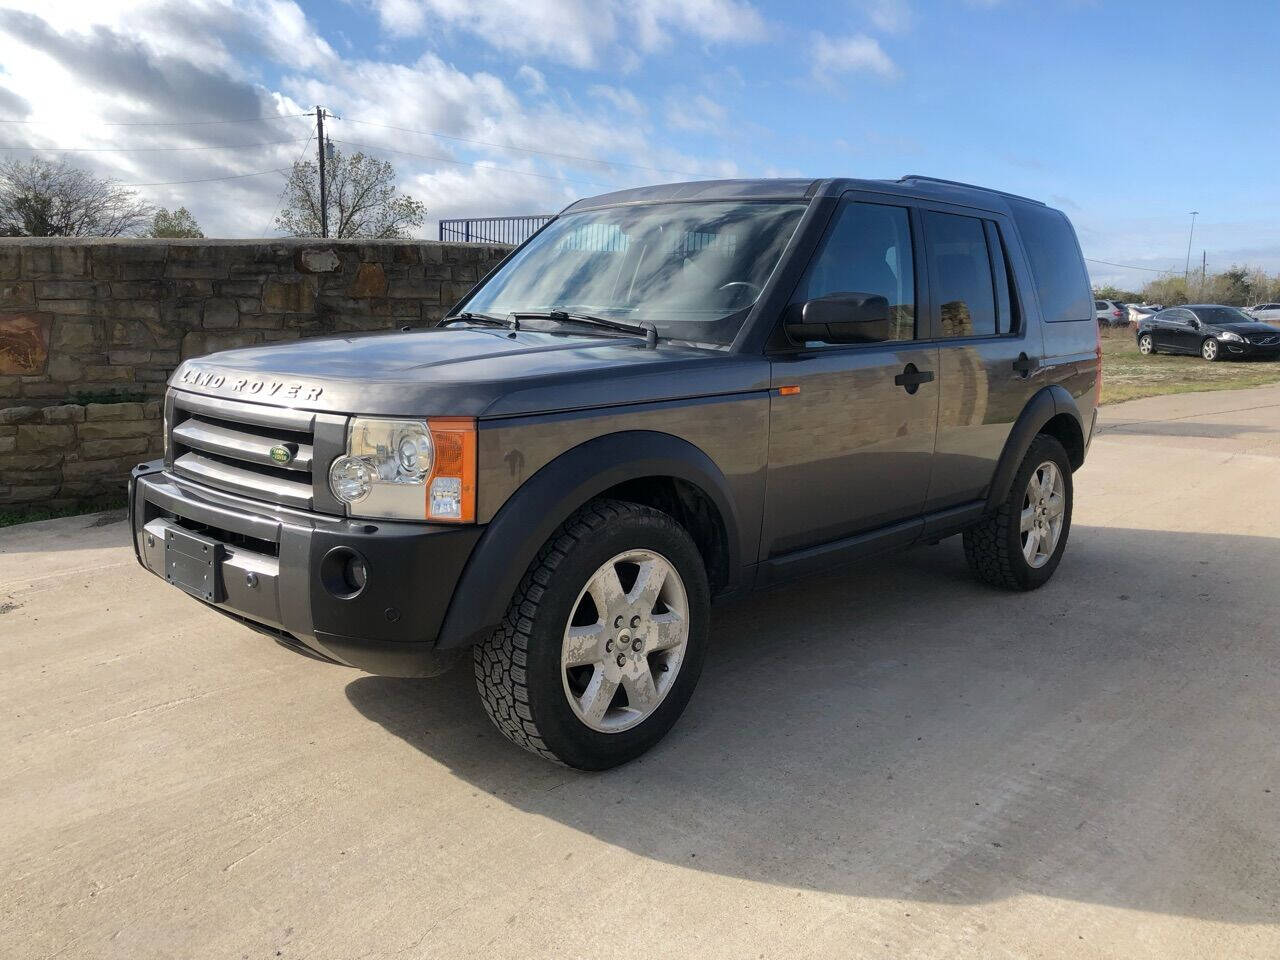 2008 Land Rover LR3 HSE LUX For Sale